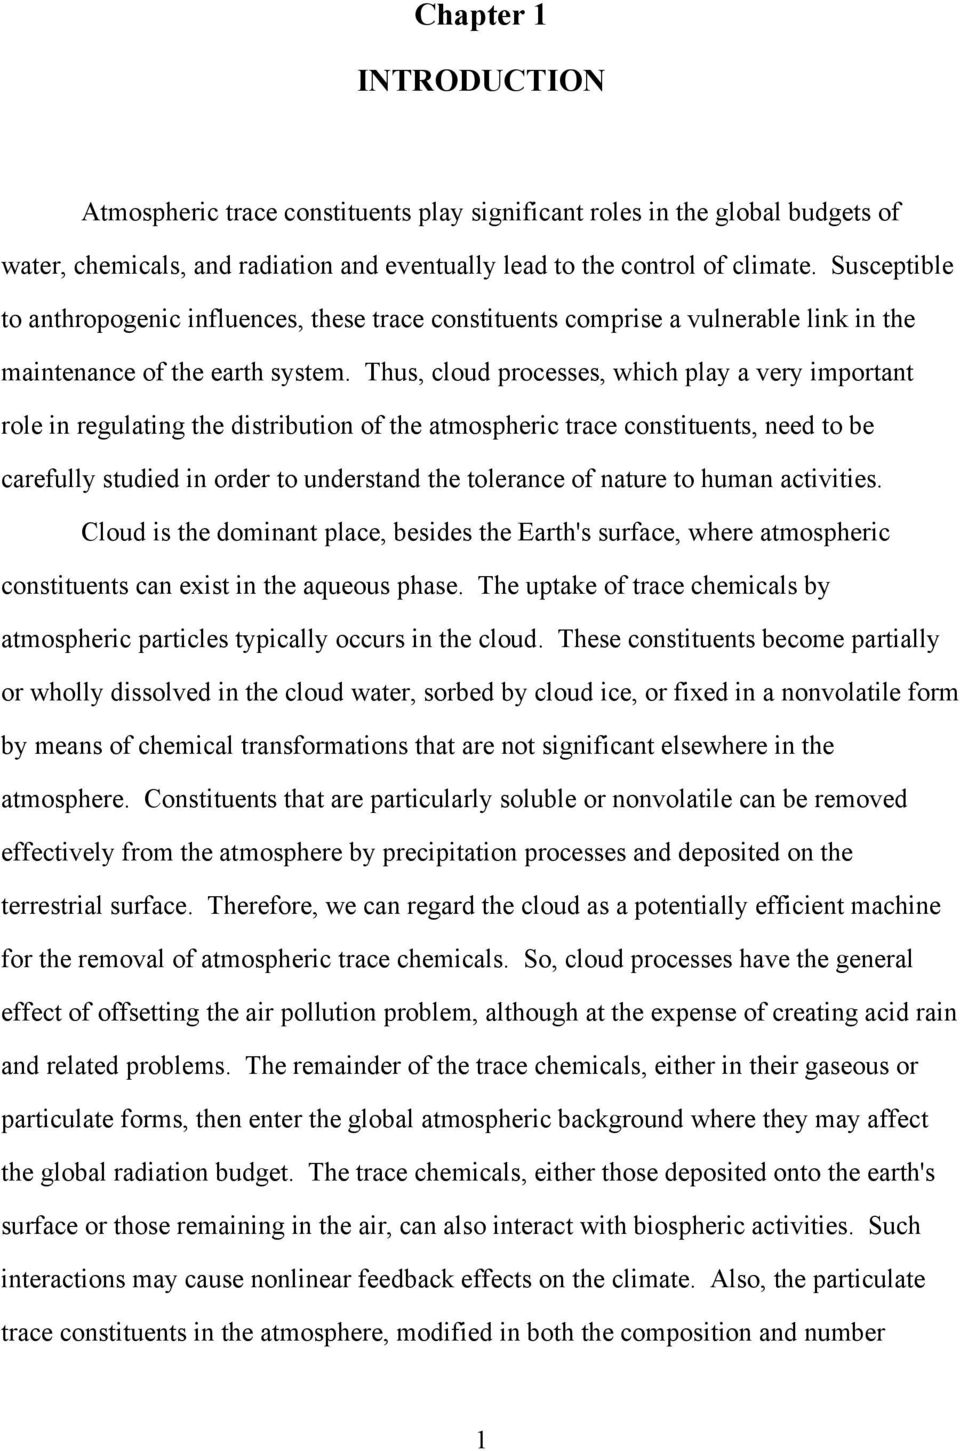 Thus, cloud processes, which play a very important role in regulating the distribution of the atmospheric trace constituents, need to be carefully studied in order to understand the tolerance of